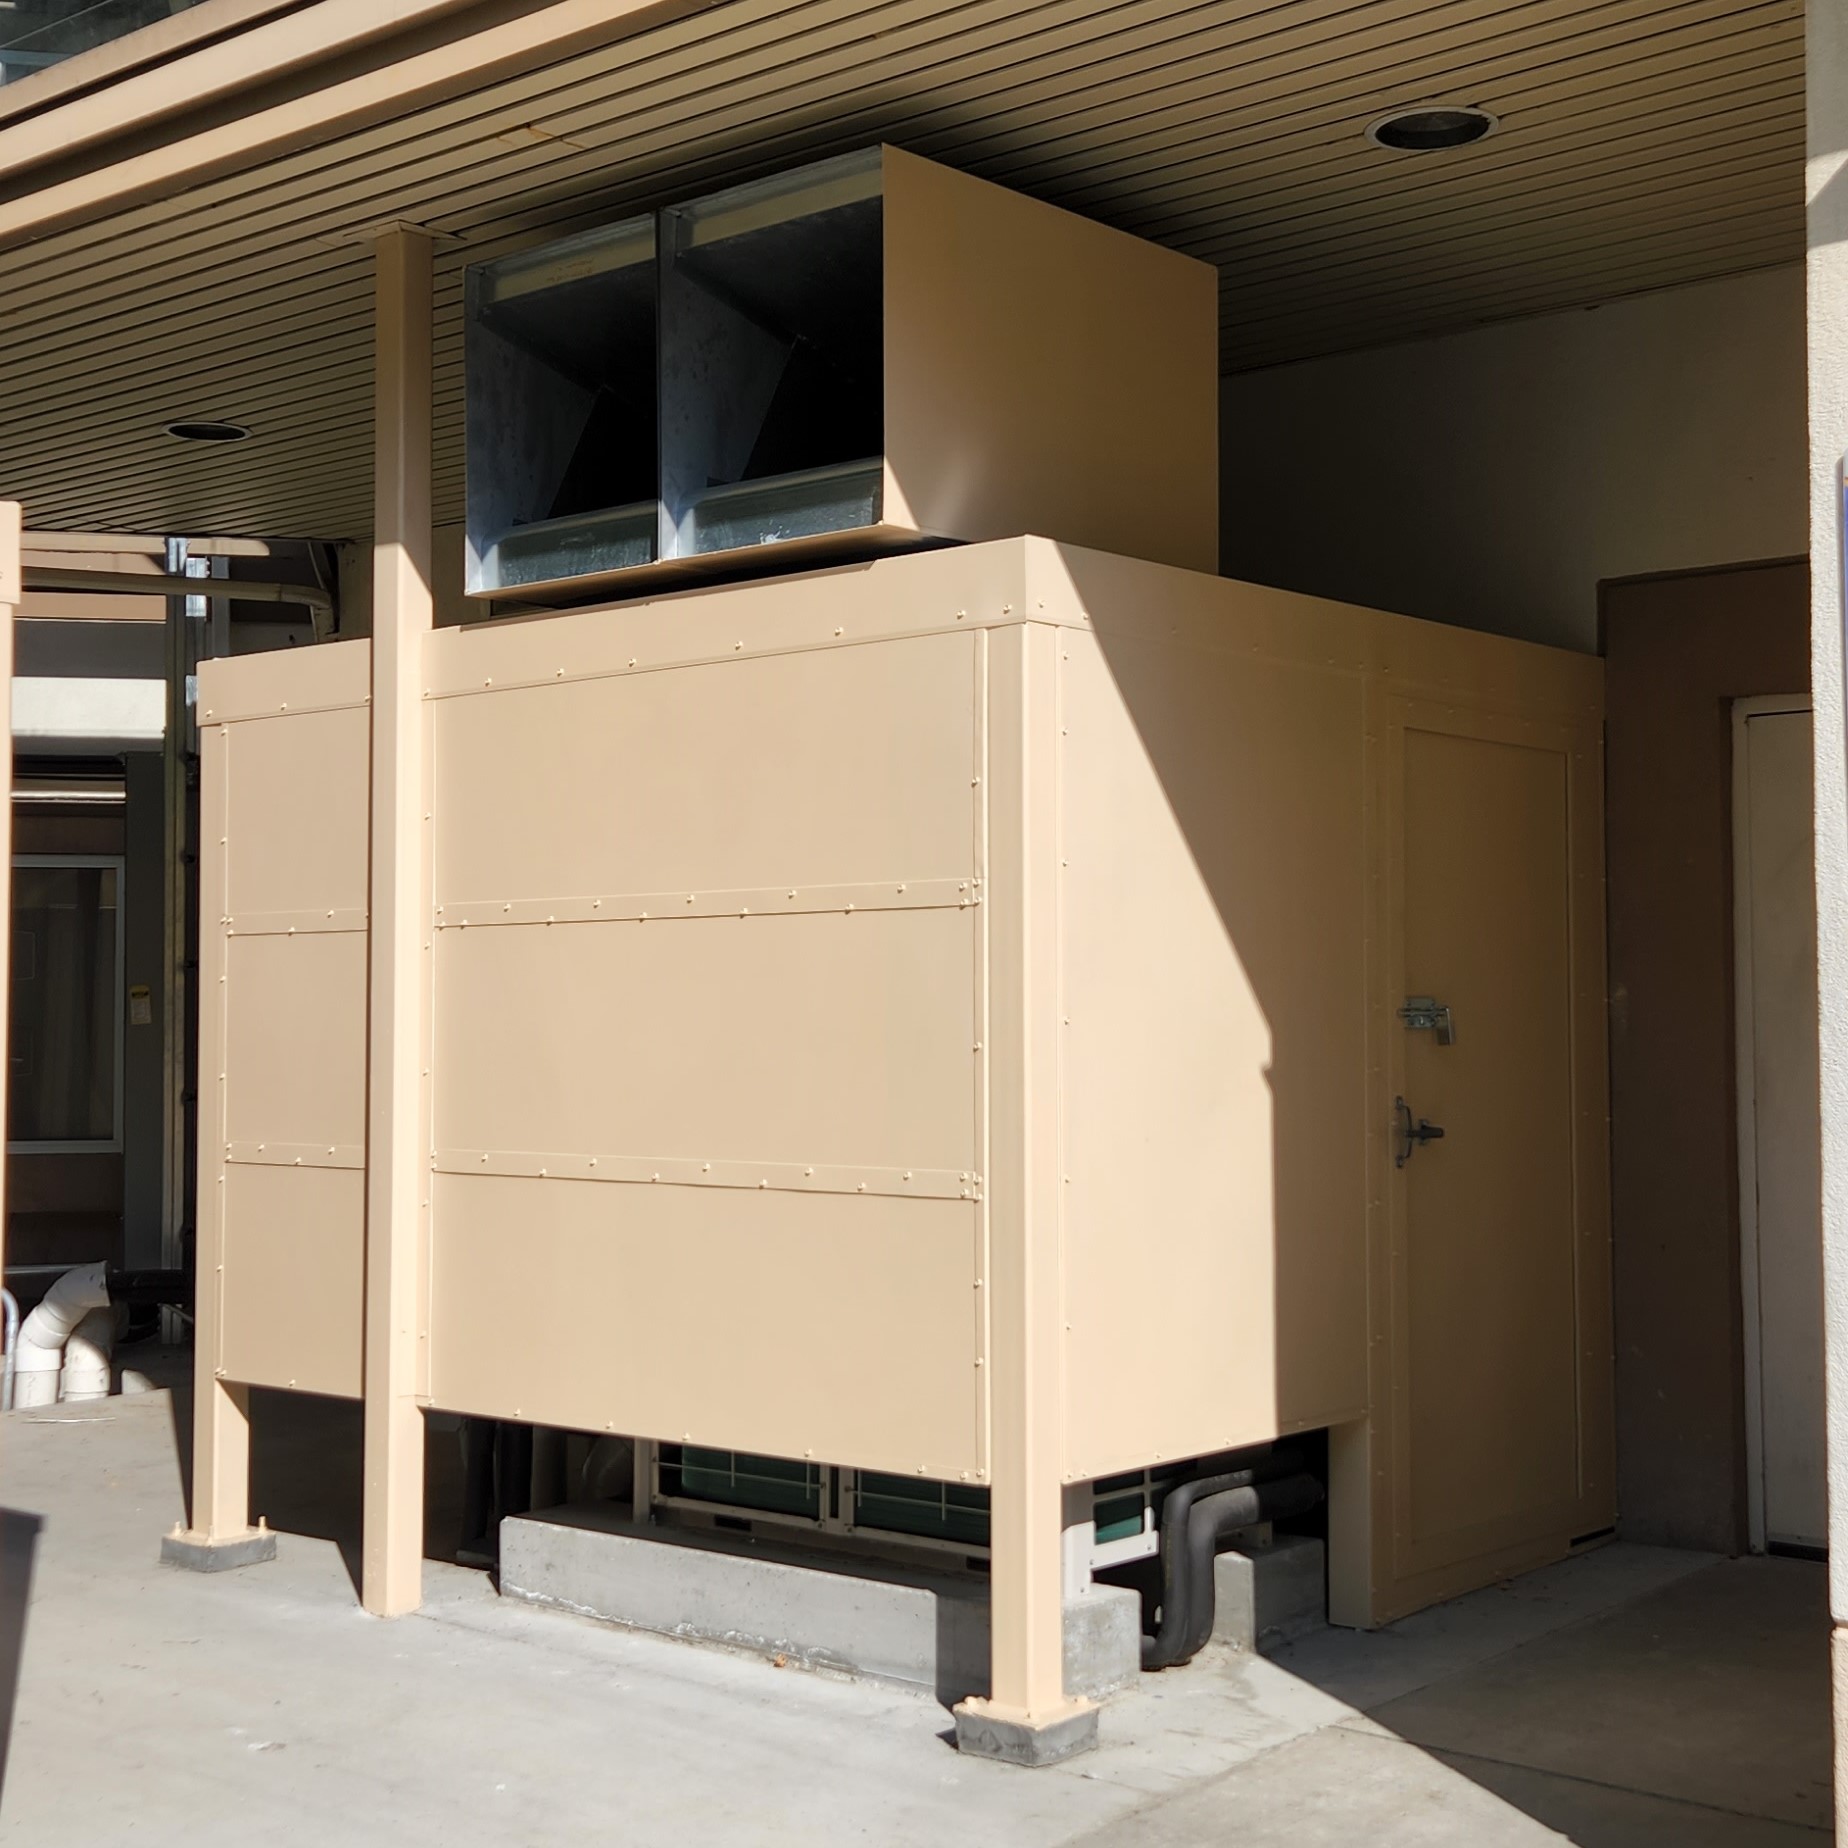 Full acoustic enclosure outside of a building